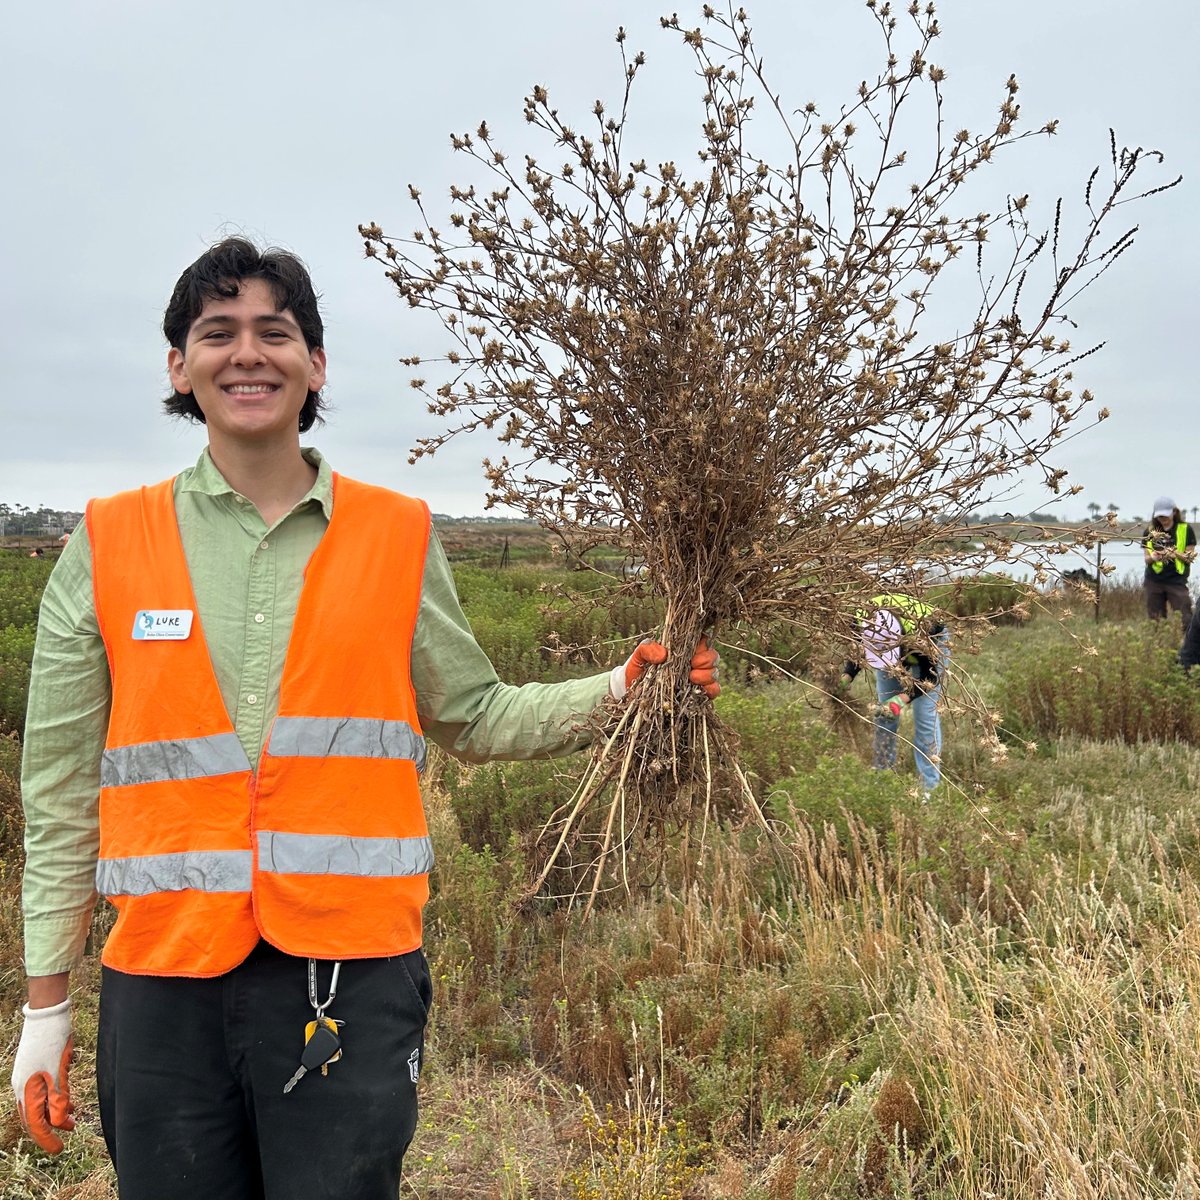 Spotlight: Luke M has interned with The Bolsa Chica Conservancy, primarily working in restoration, but also has spent time hosting at our interpretive center, leading volunteers, and conducting surveys. Luke has been a valuable team member, and we hope to see him back soon!